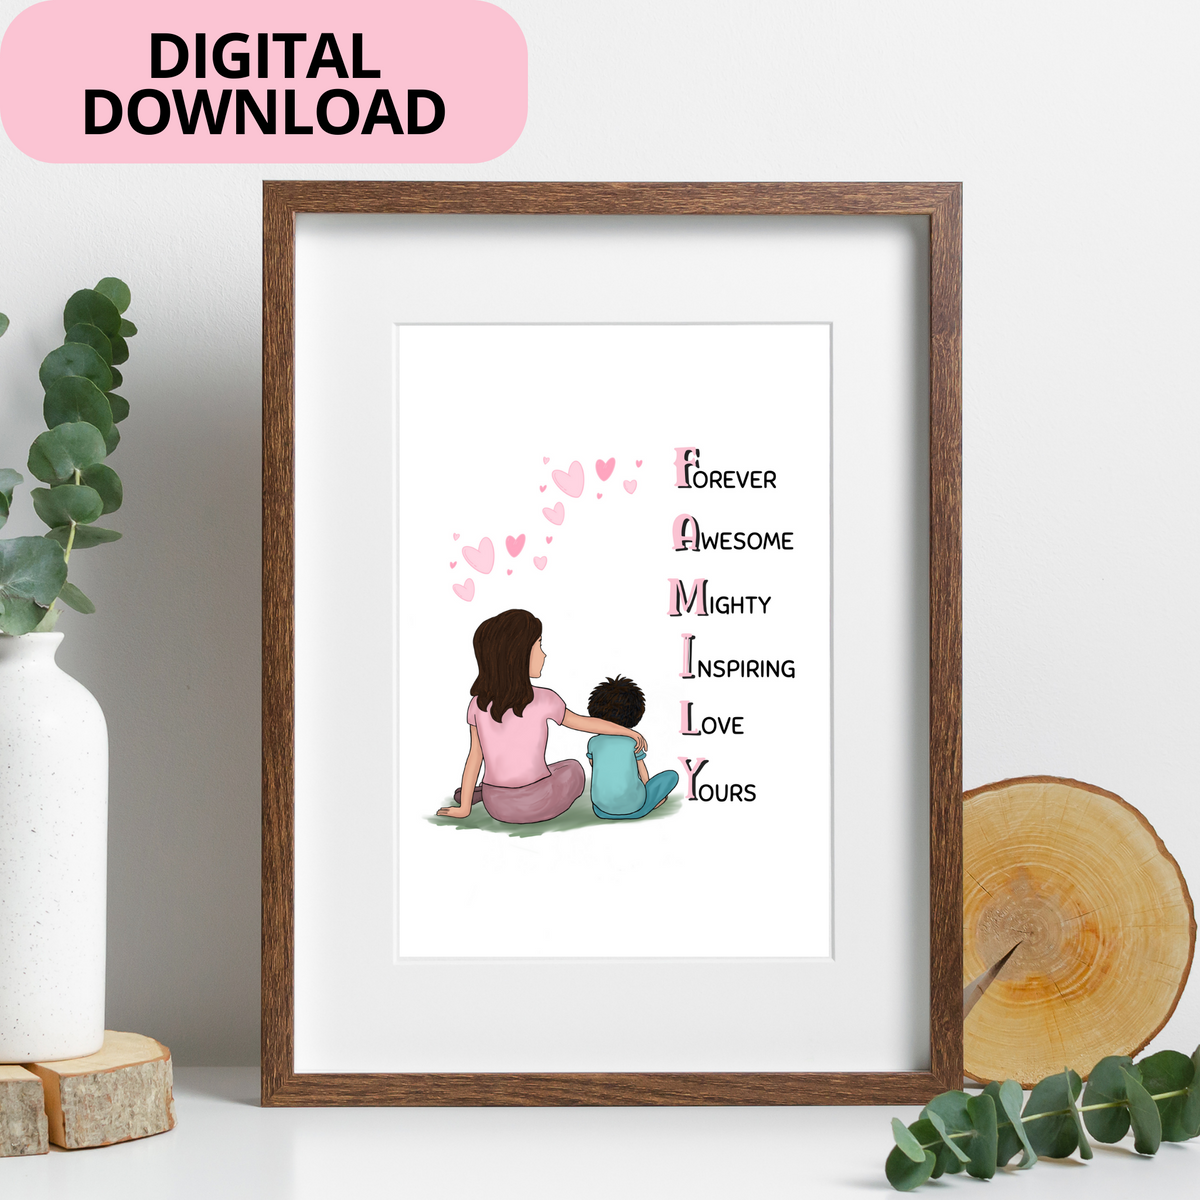 Family Acrostic Poster framed in a dark wooden frame, leaning up on a desk. The poster contains an illustration of a mother with her arm around her child.